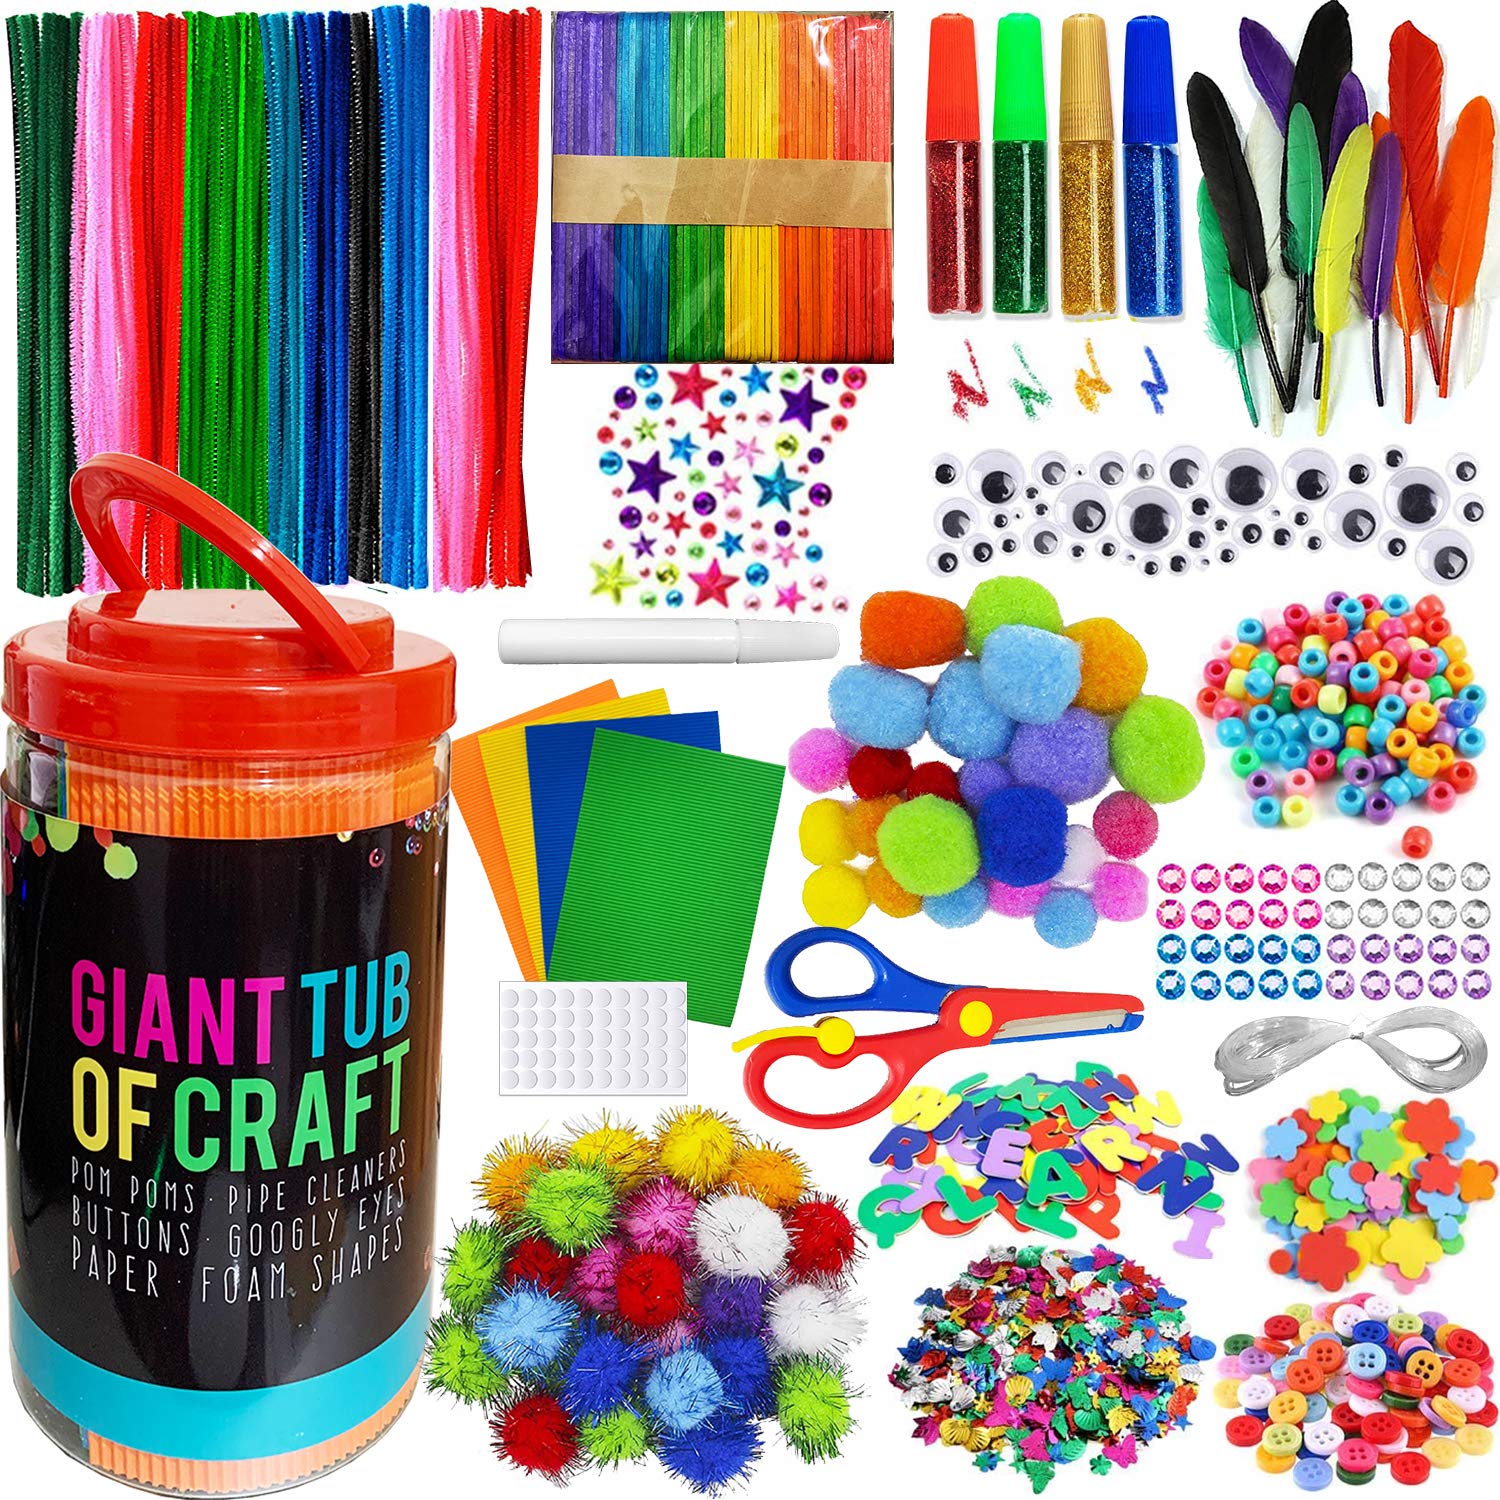 MOISO Mega Kids Crafts and Art Supplies Jar Kit - 550+ Piece Set - Make Bracelets and Necklaces - Plus Glitter Glue, Construction Paper, Colored Popsicle Sticks, Google Eyes, Pipe Cleaners